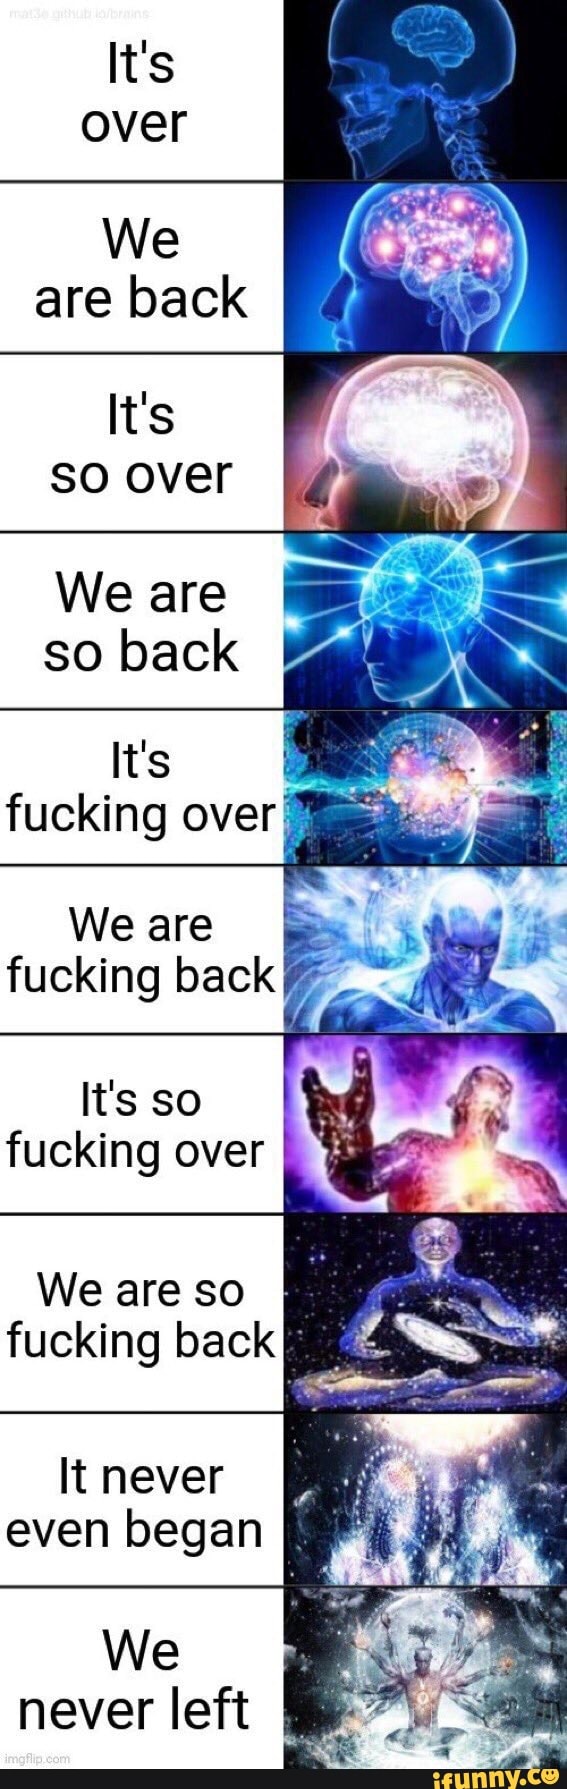 Over We are back It's so over We are so back it's fucking over We are